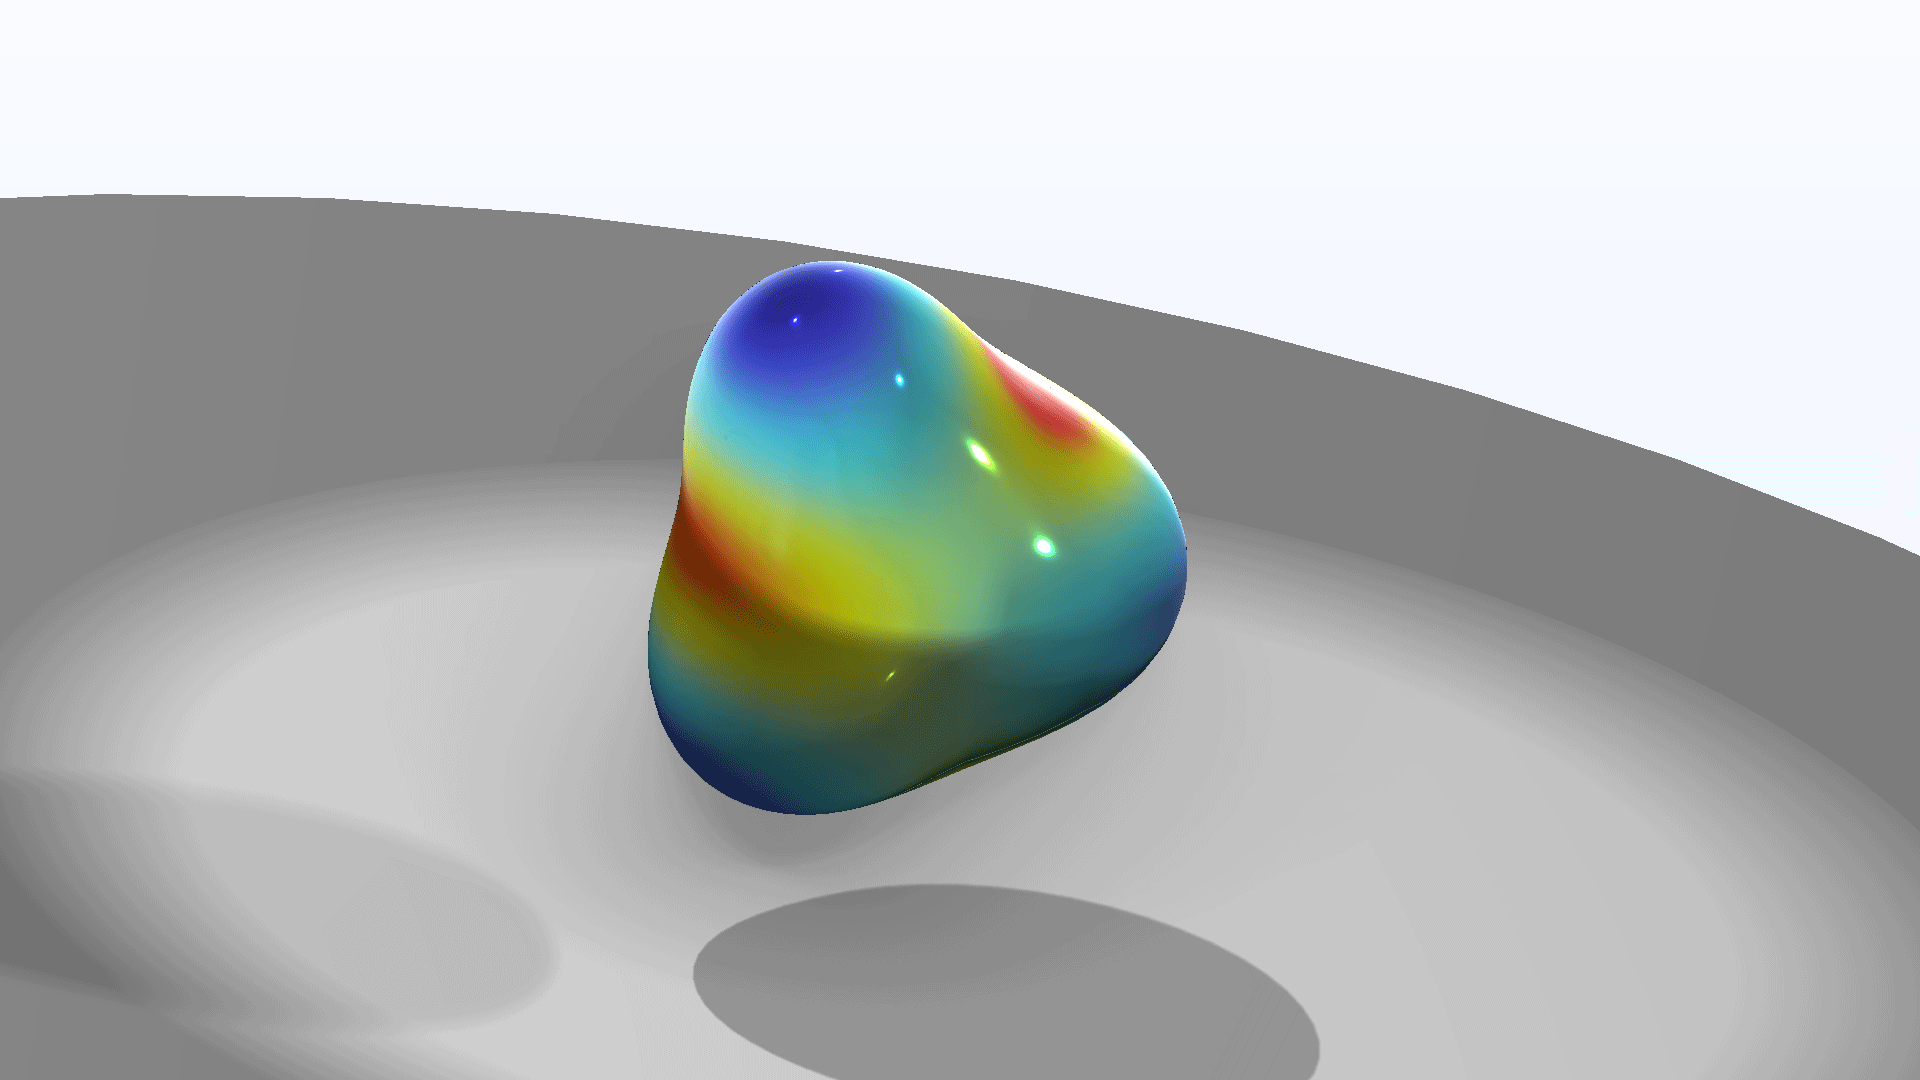 A micro air bubble model showing the eigenmodes and eigenfrequencies in the Rainbow color table.